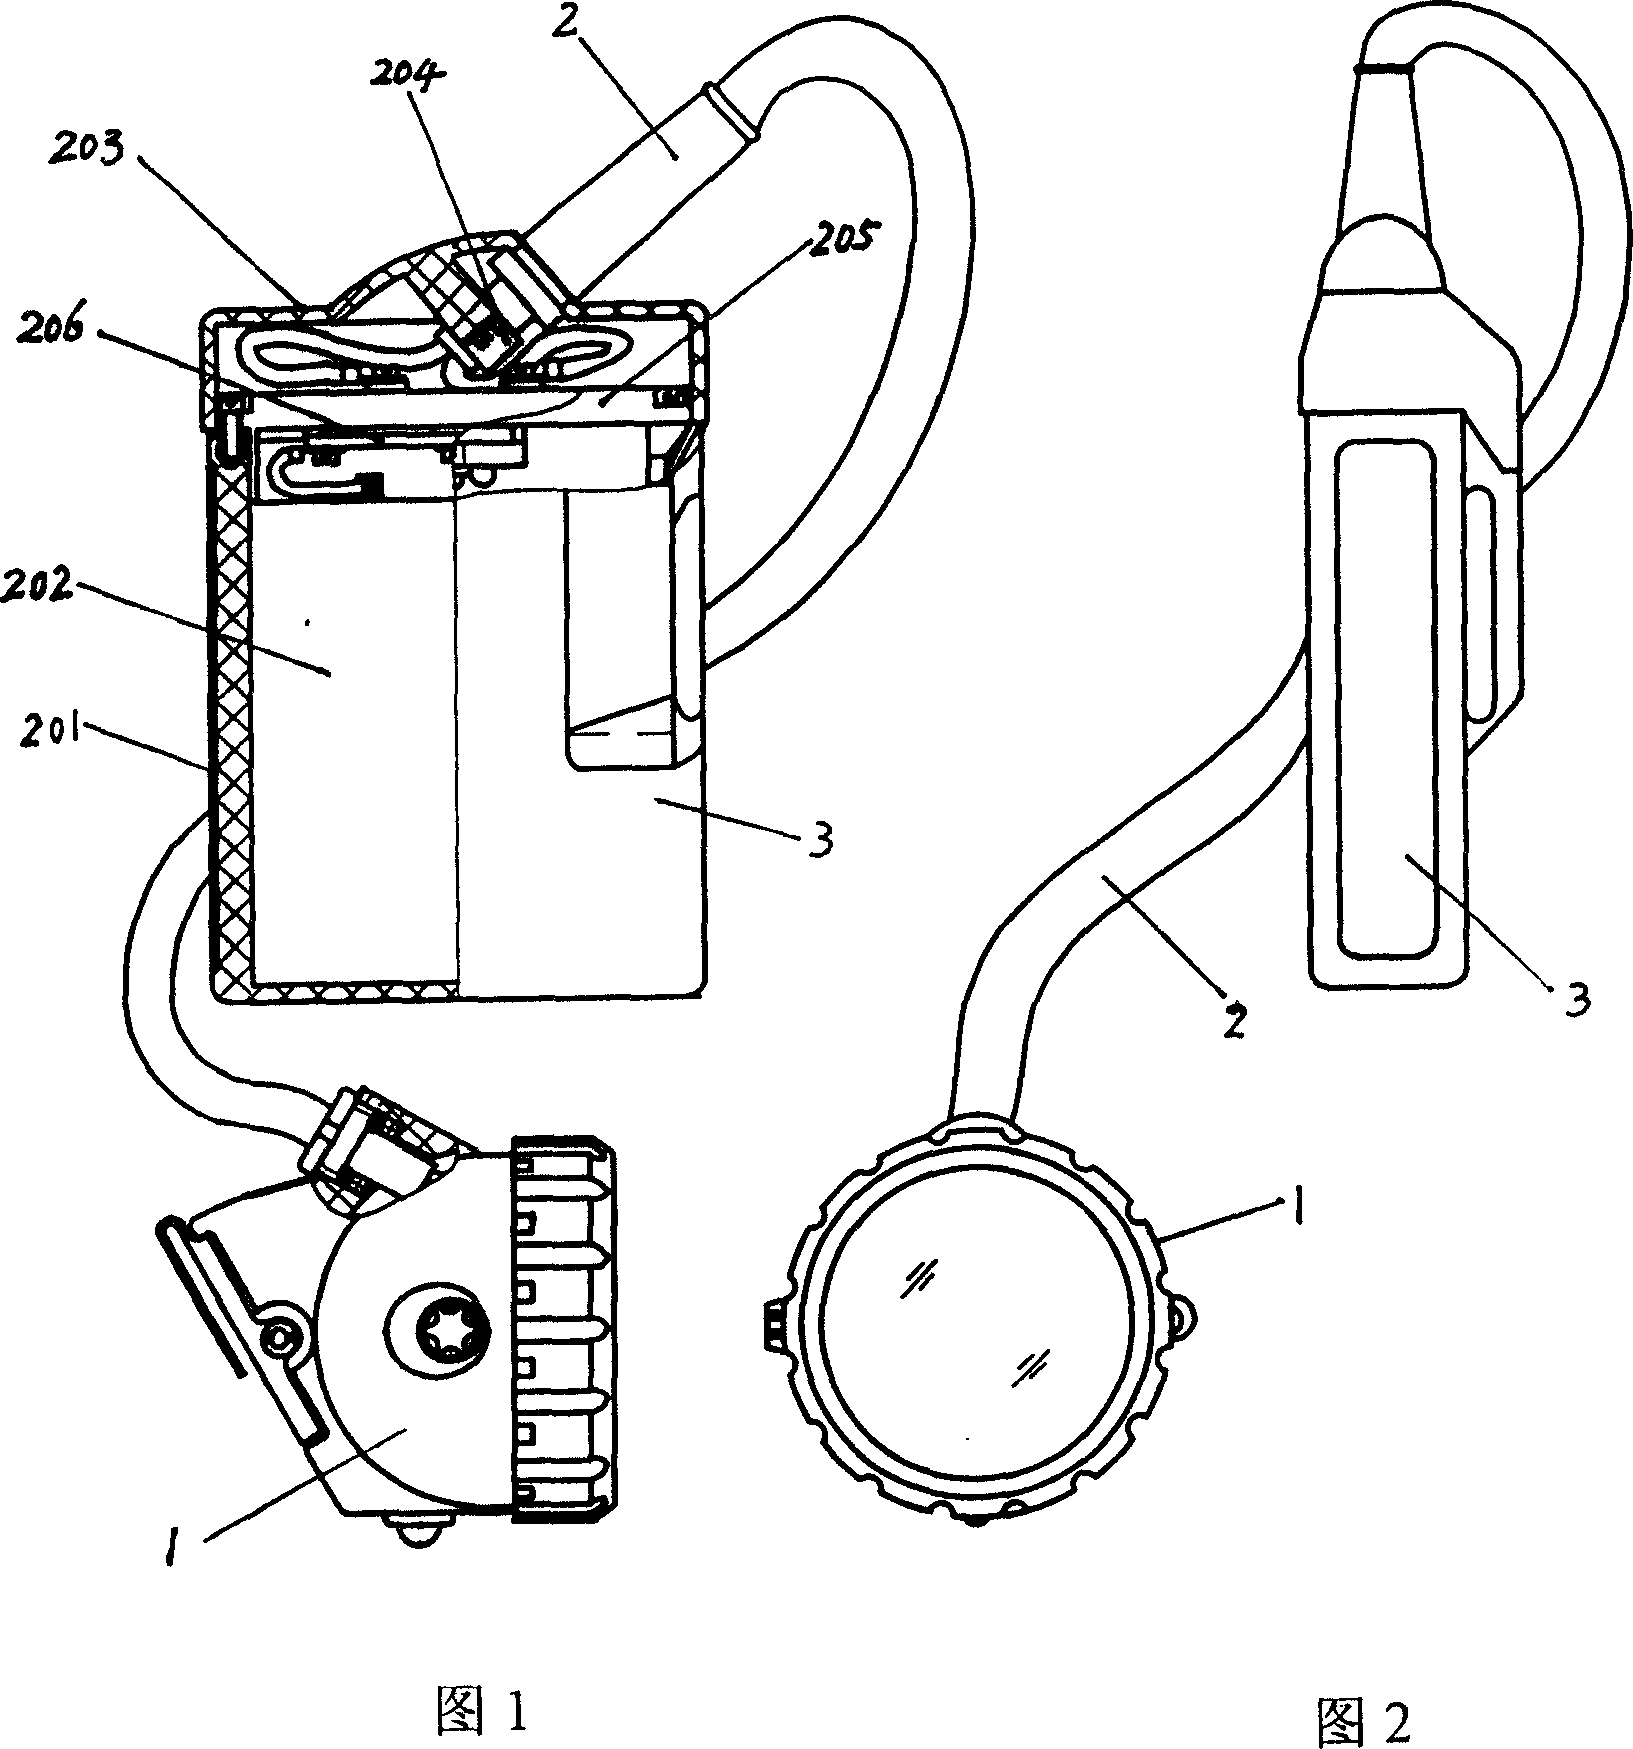 Semiconductor mining cap lamp having a charging-discharging control and protection system